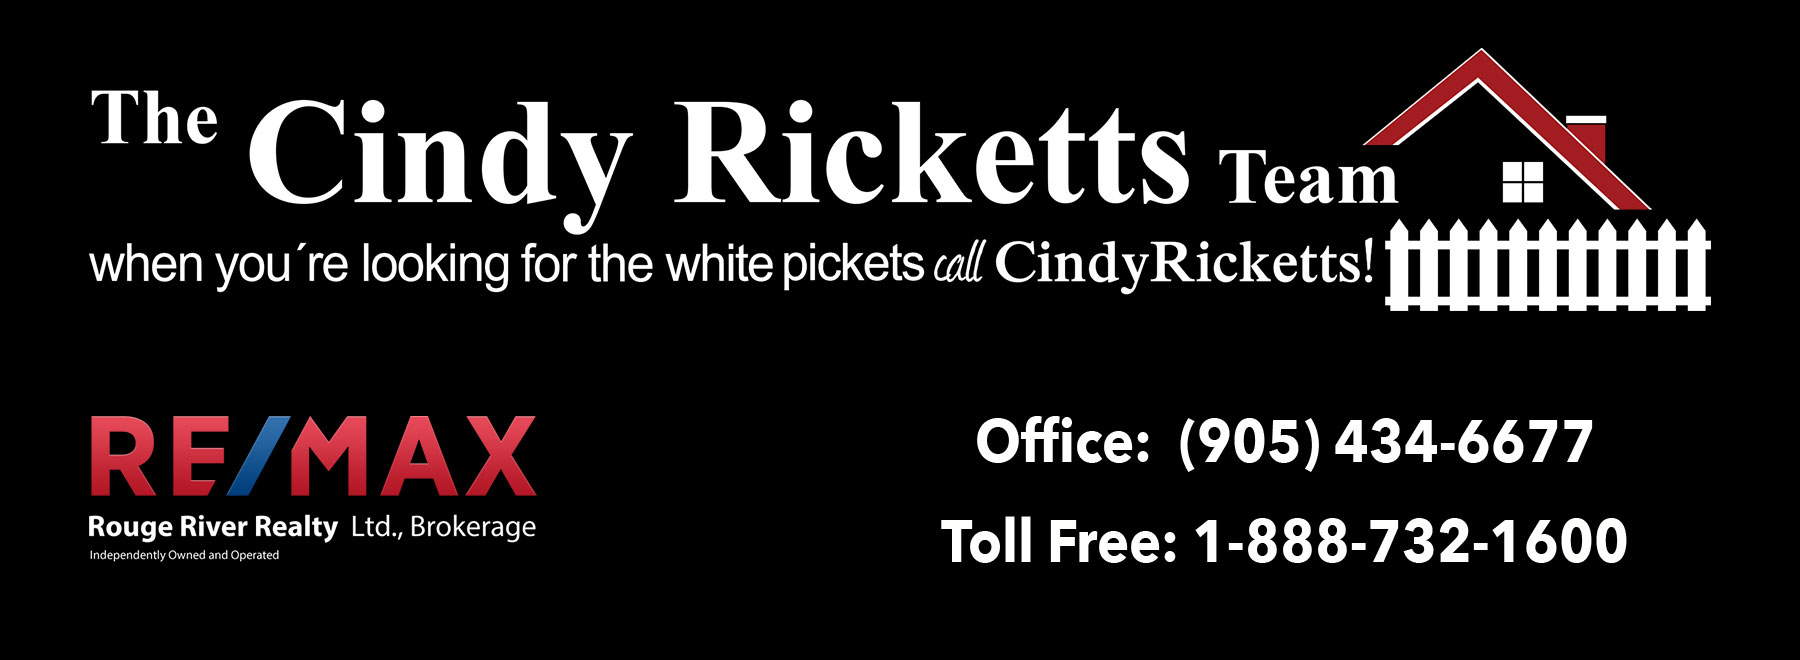 The Cindy Ricketts Team - RE/MAX Rouge River Realty Ltd., Brokerage